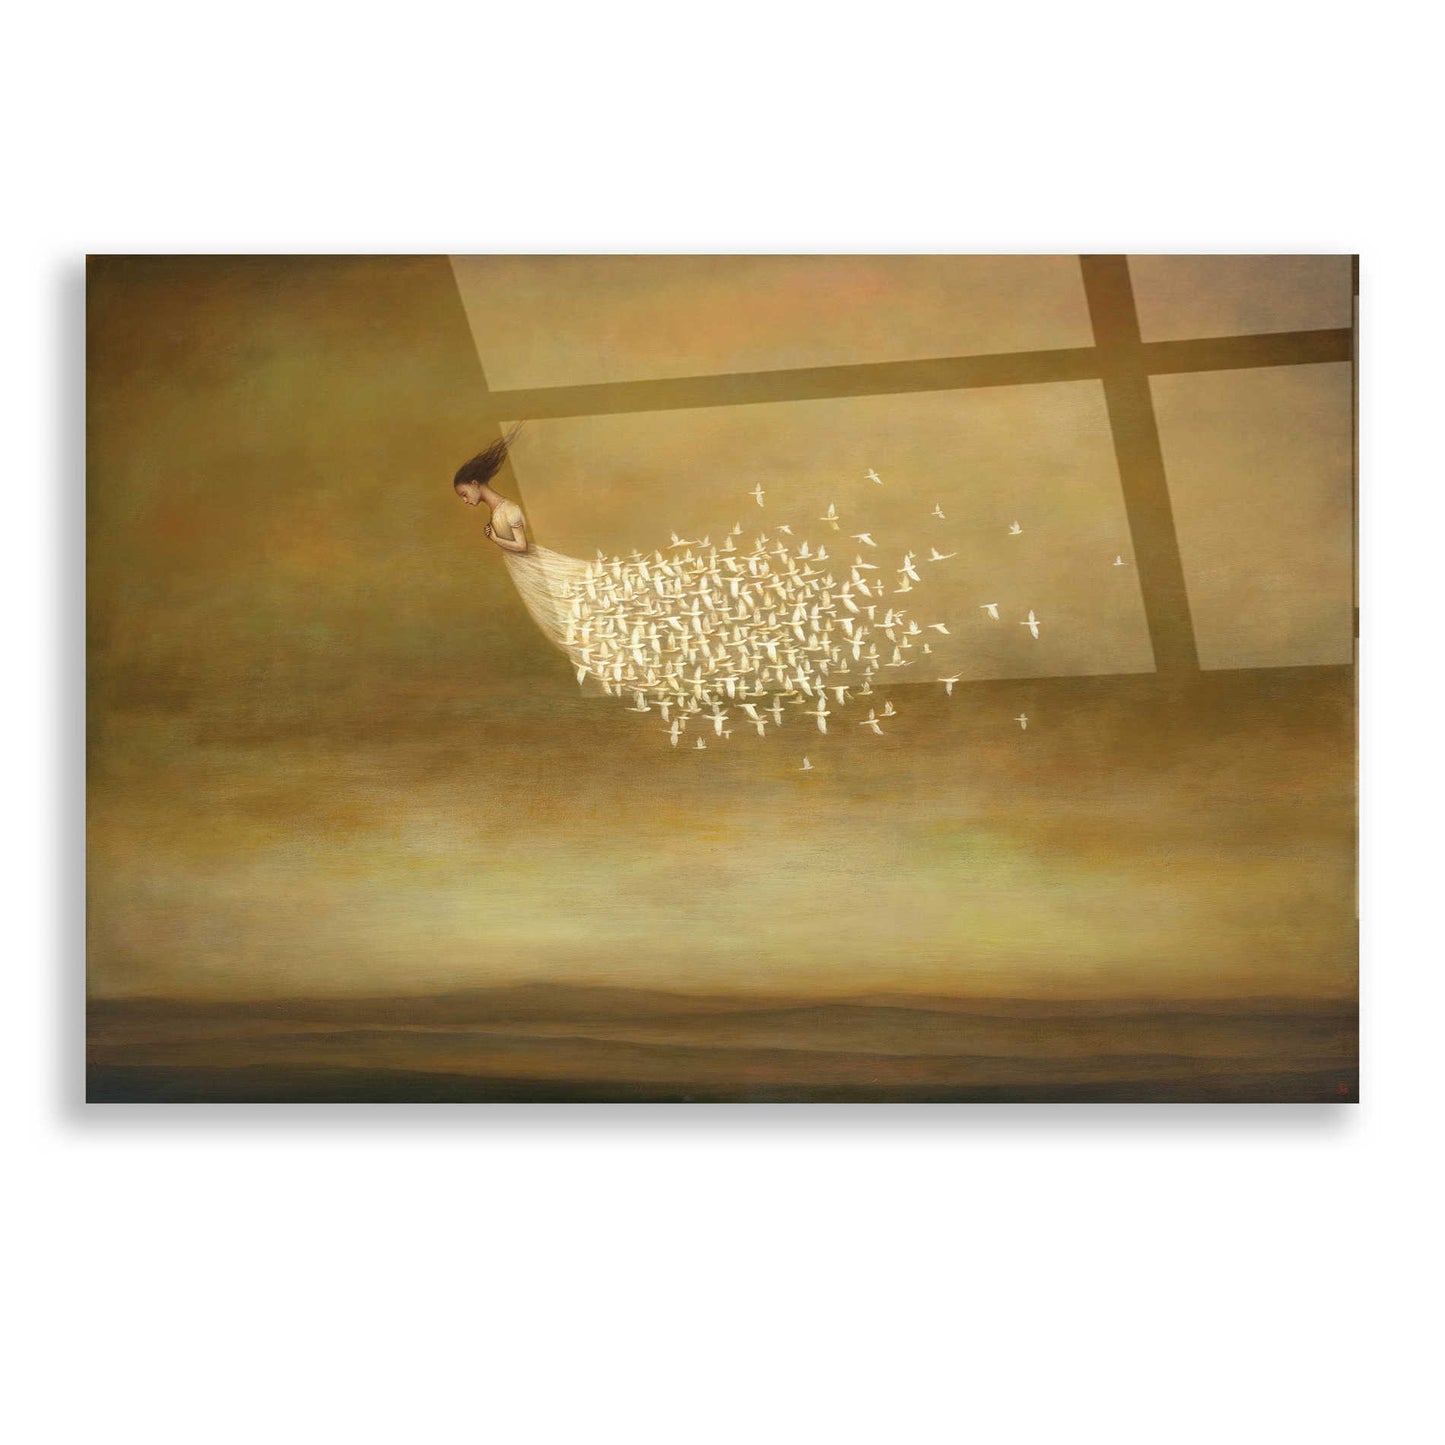 Epic Art 'Freeform' by Duy Huynh, Acrylic Glass Wall Art,16x12